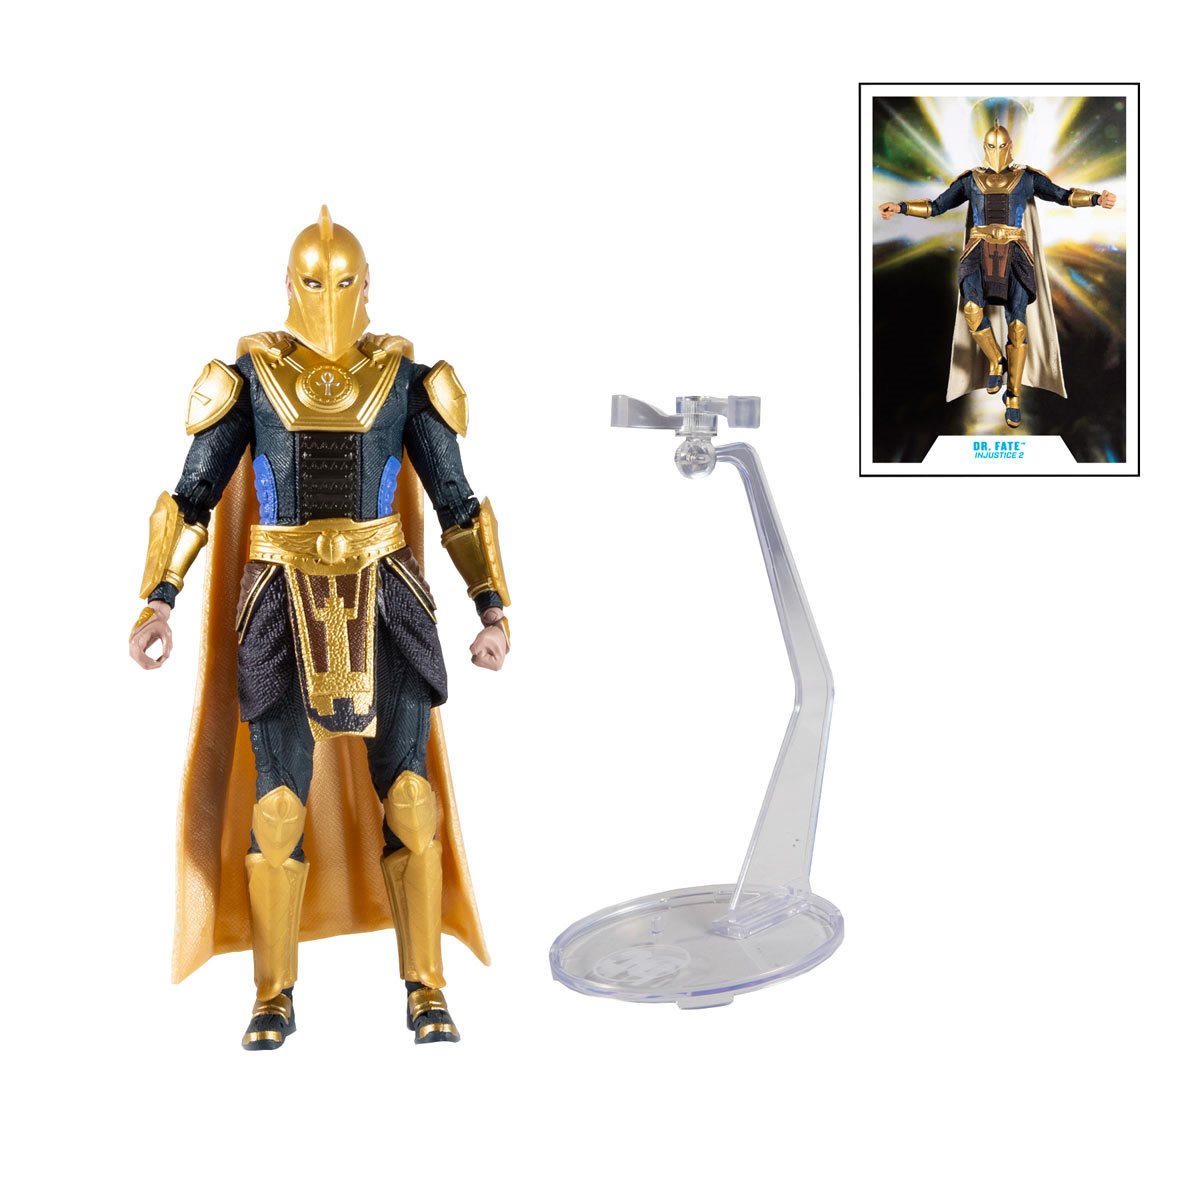 DC Gaming Wave 4 7-Inch Dr. Fate Action Figure